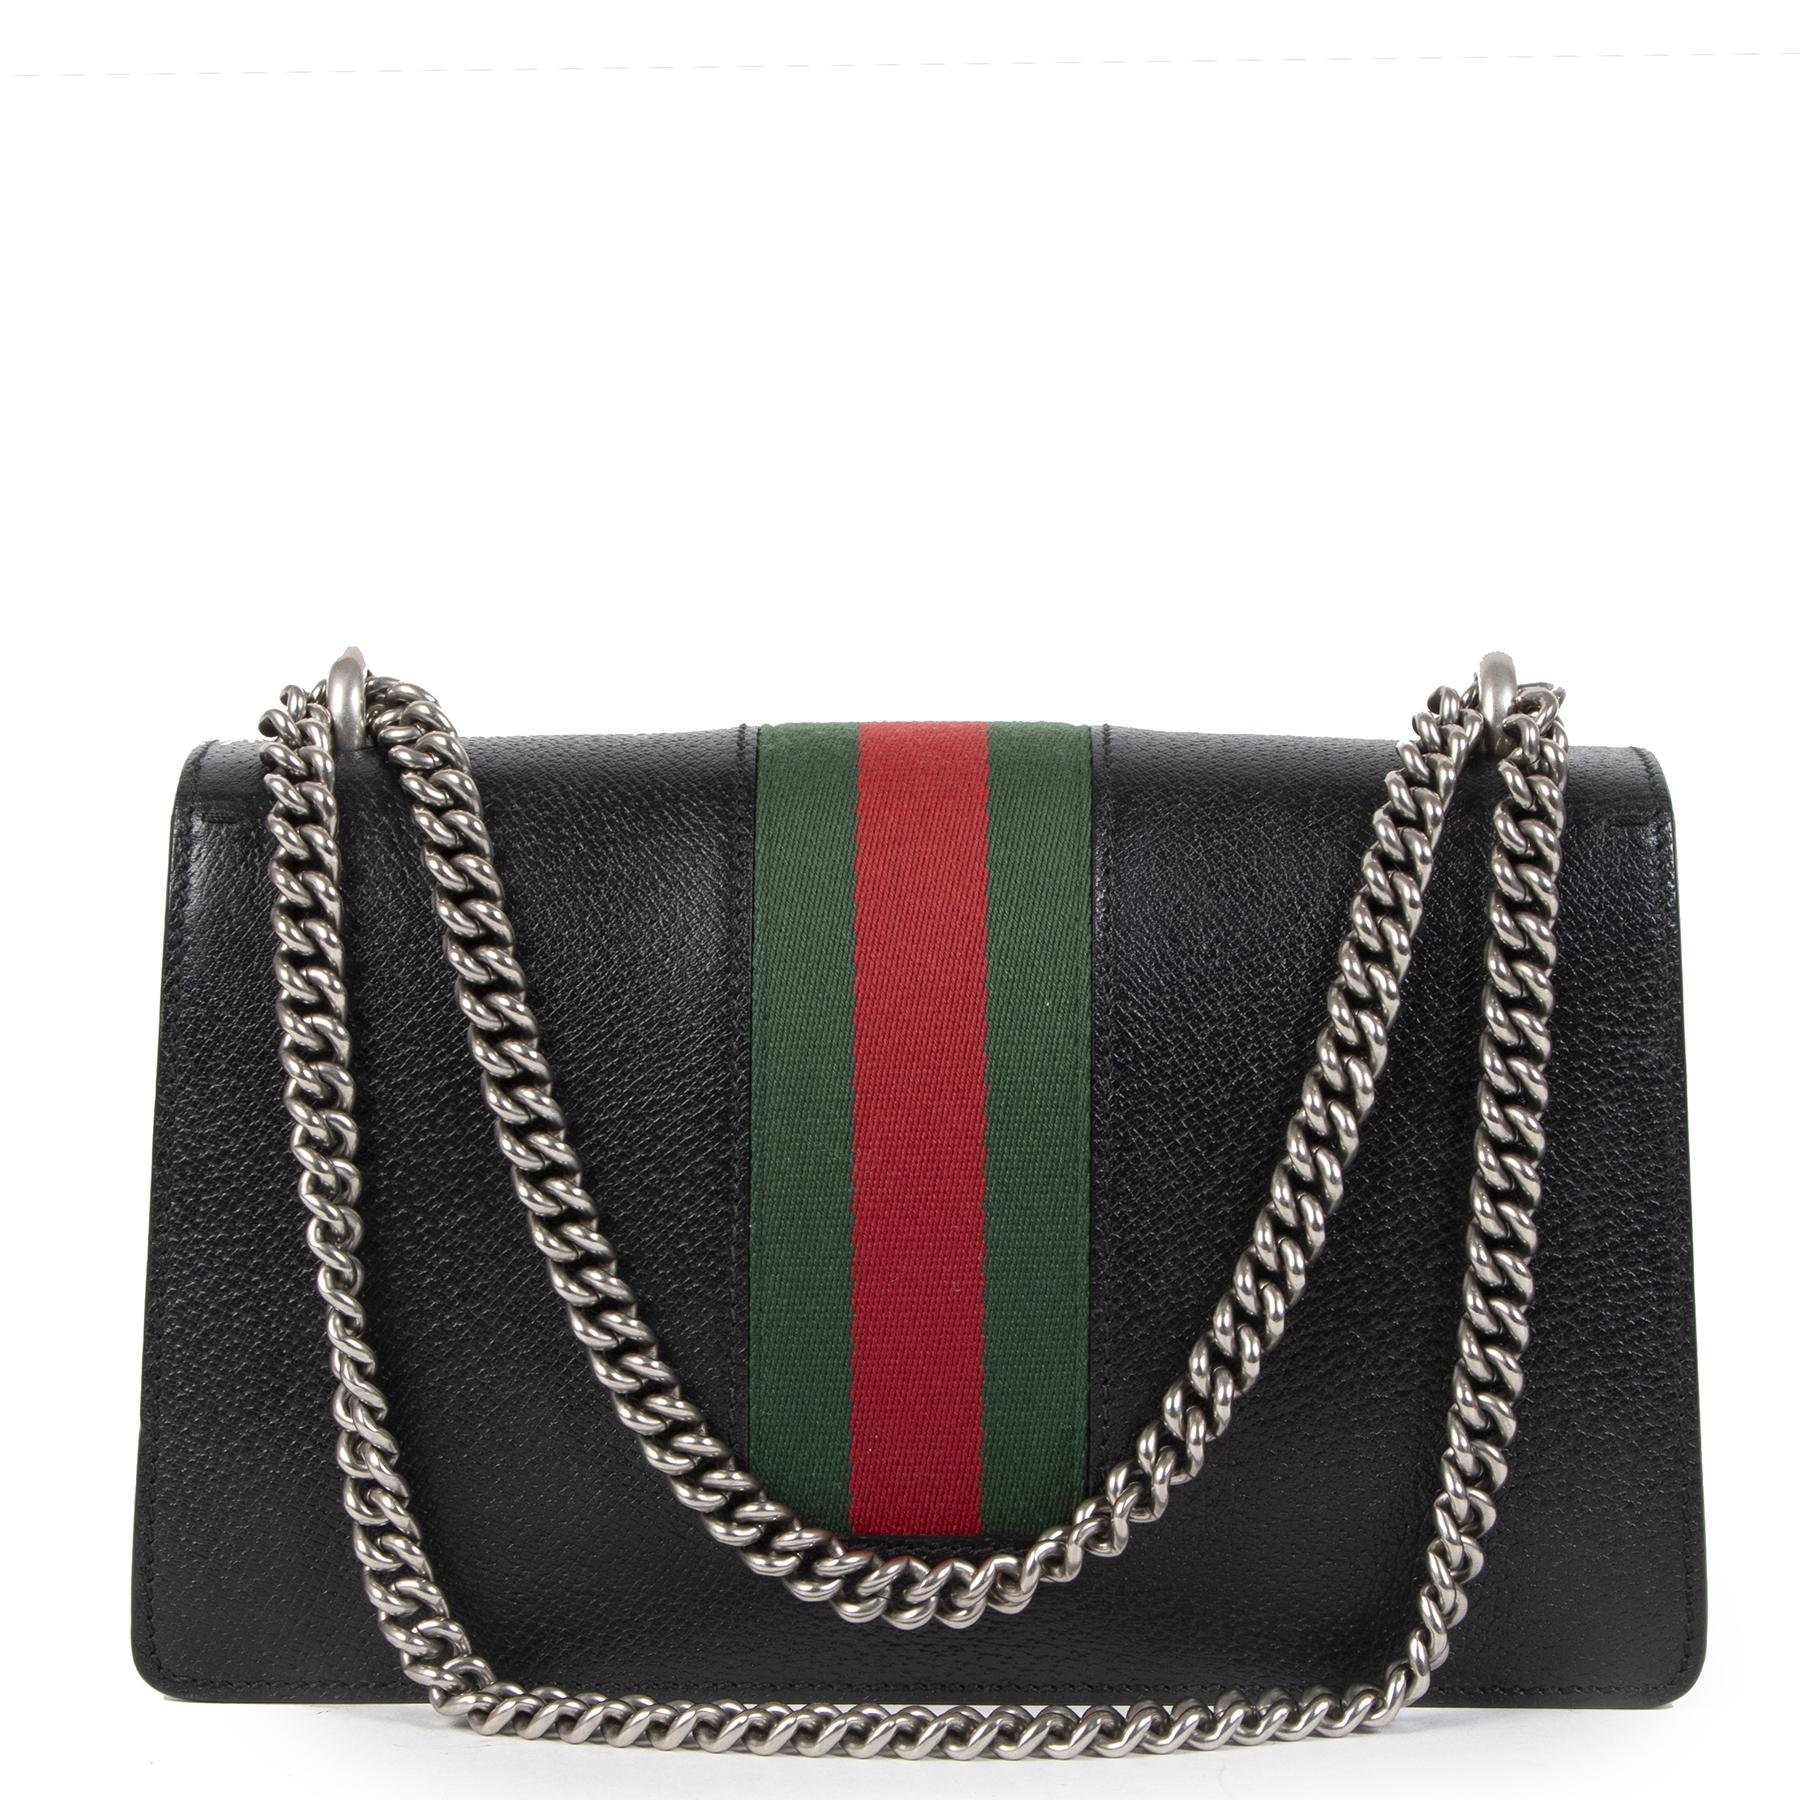 Excellent condition

Gucci Dyonisus Web Black Shoulder Bag

Looking for the perfect everyday bag with a twist? You've found it in this Guccy Dyonisus Web shoulder bag. Its grainy and structured black leather is the perfect basis, the iconic Web